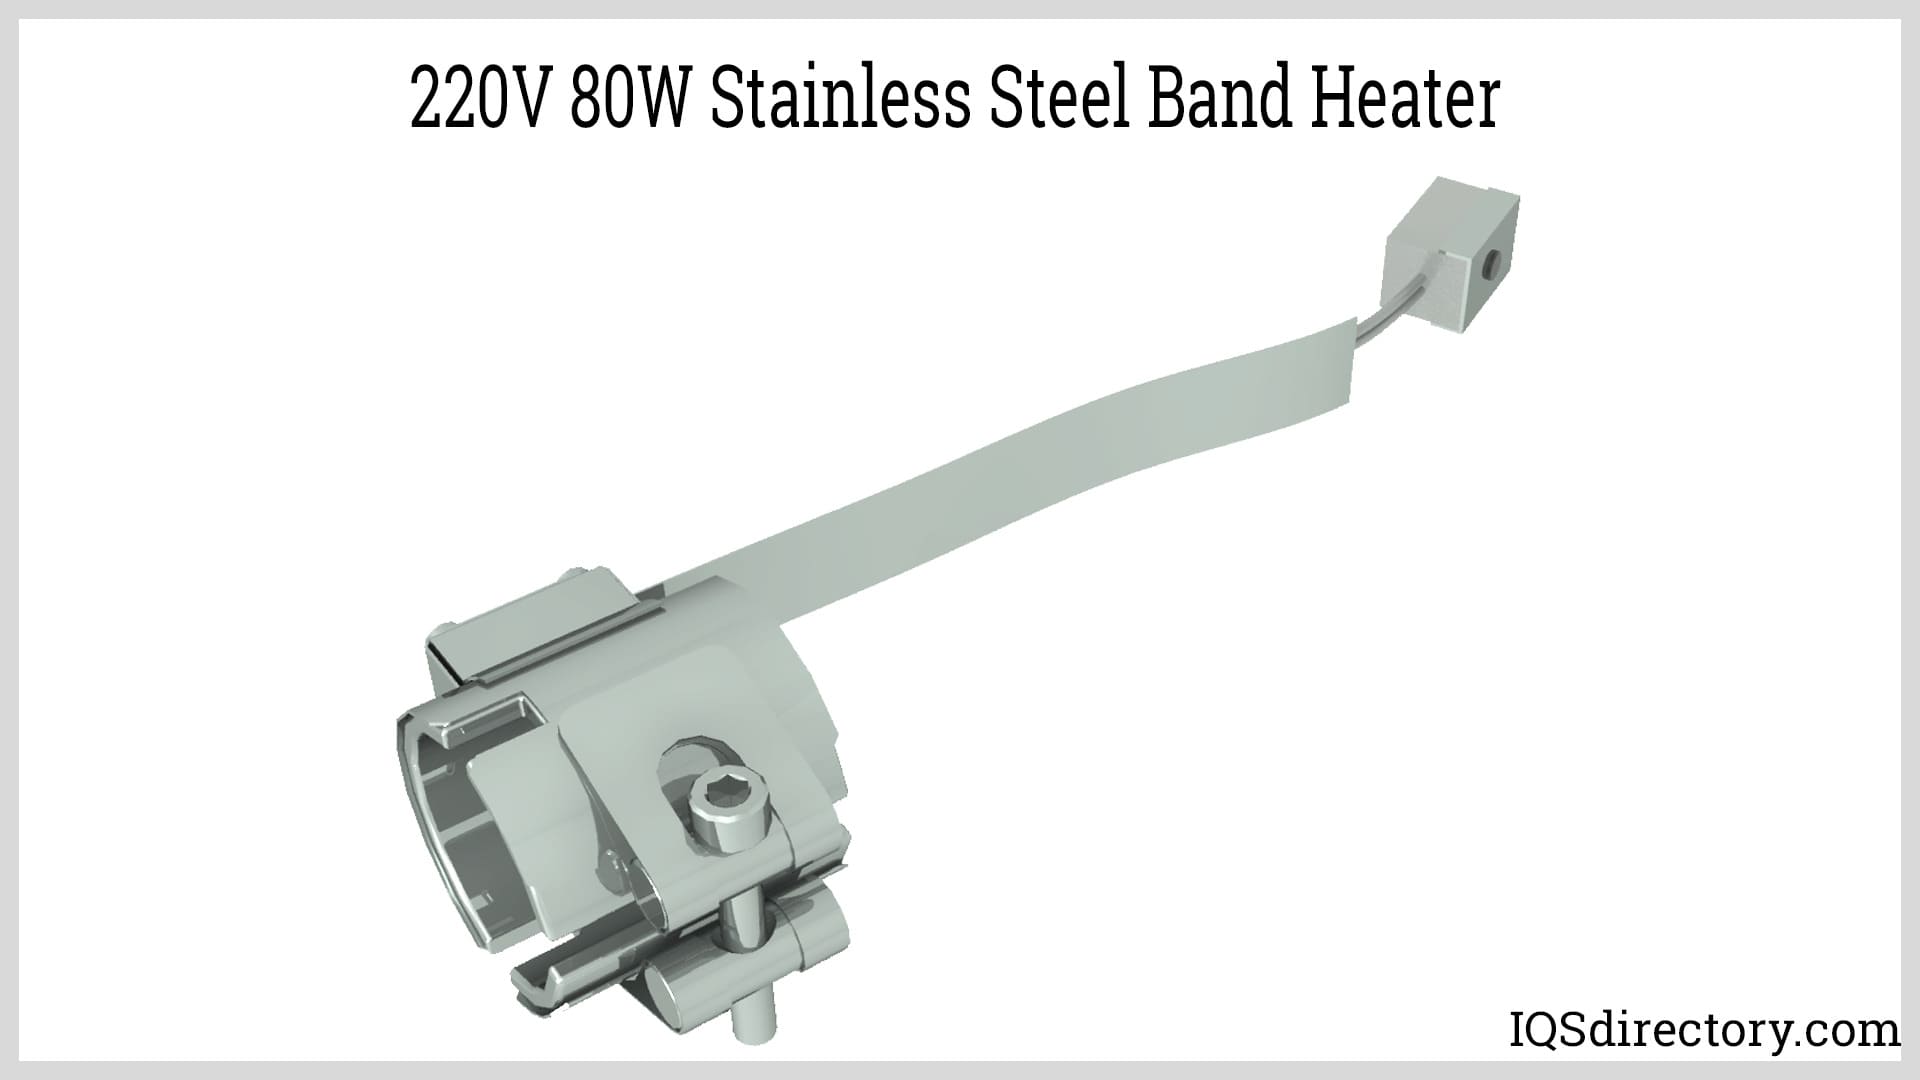 220V 80W Stainless Steel Band Heater